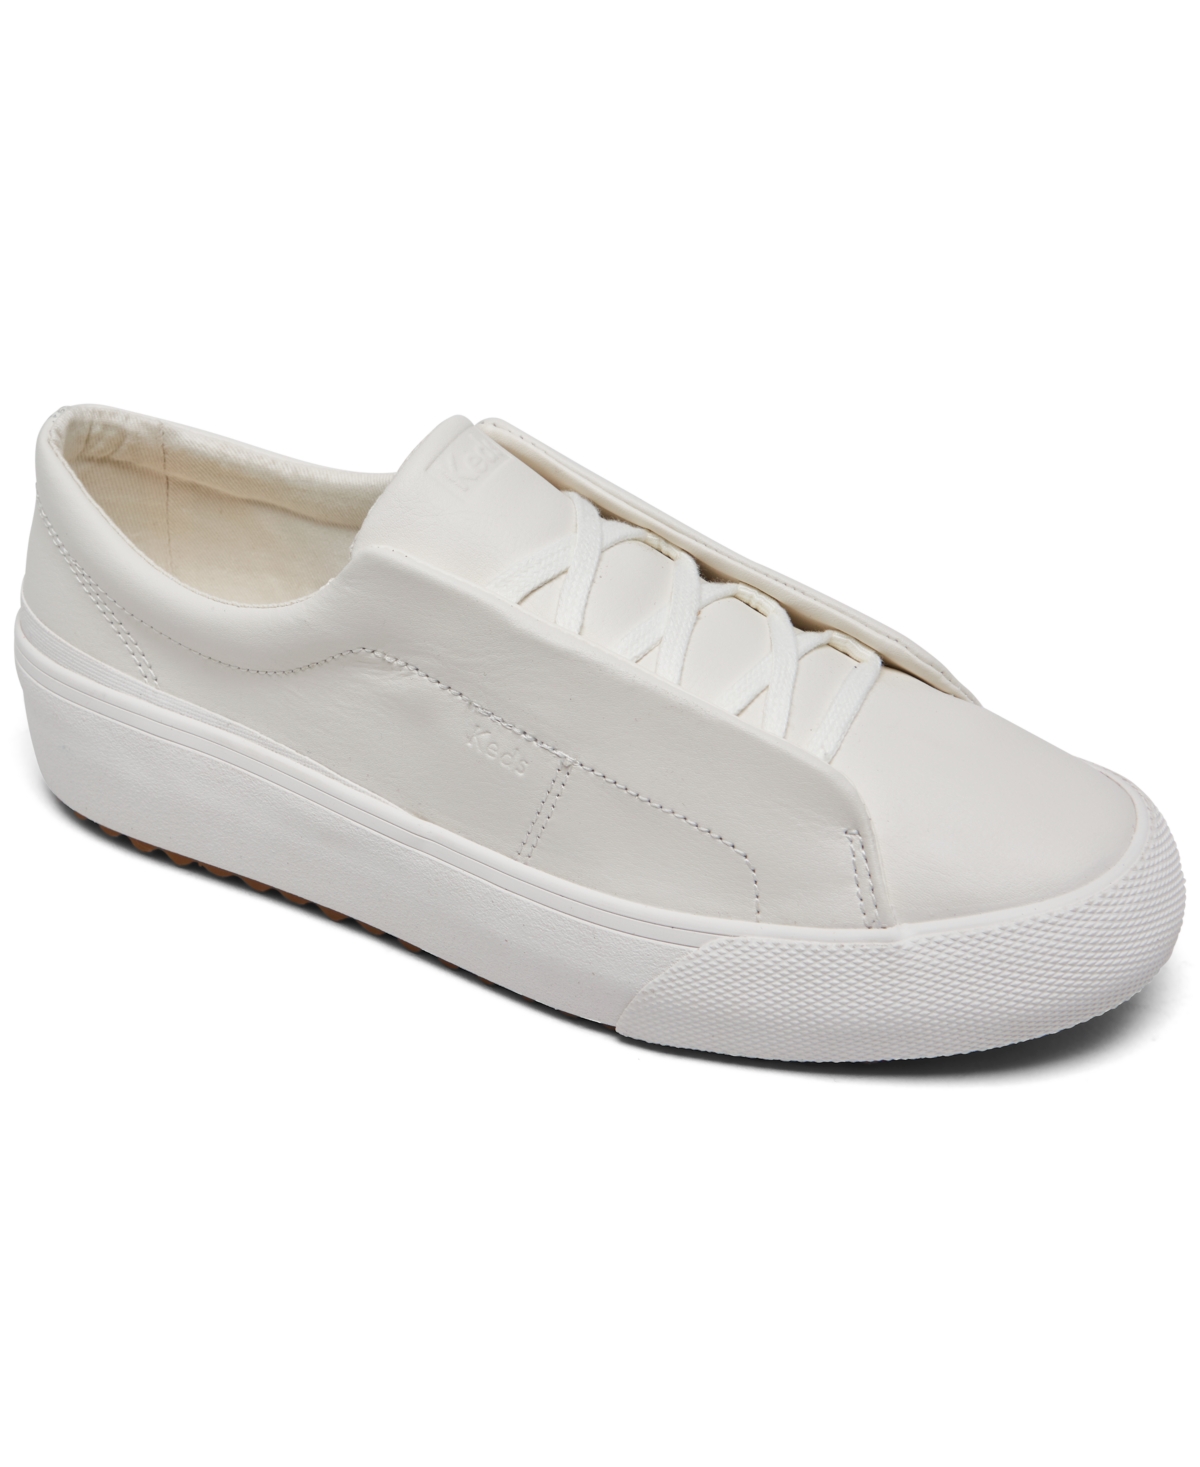 Women's Remi Leather Casual Sneakers from Finish Line - Snow White